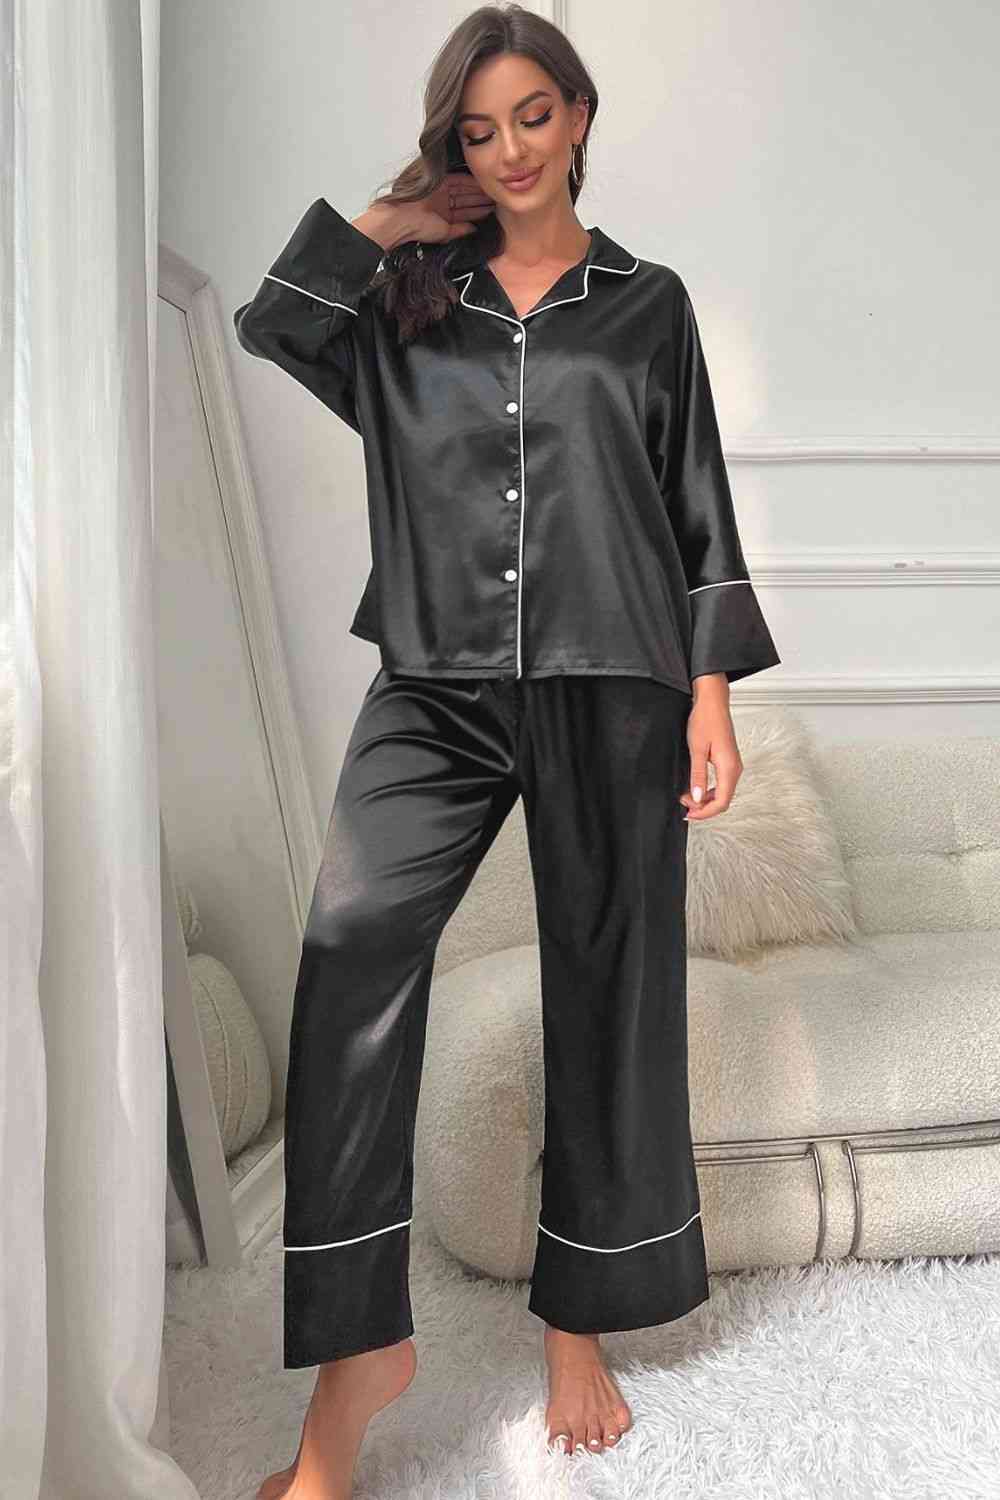 Contrast Piping Button-Up Top and Pants Pajama Set -  - Wild Willows Boutique - Massapequa, NY, affordable and fashionable clothing for women of all ages. Bottoms, tops, dresses, intimates, outerwear, sweater, shoes, accessories, jewelry, active wear, and more // Wild Willow Boutique.